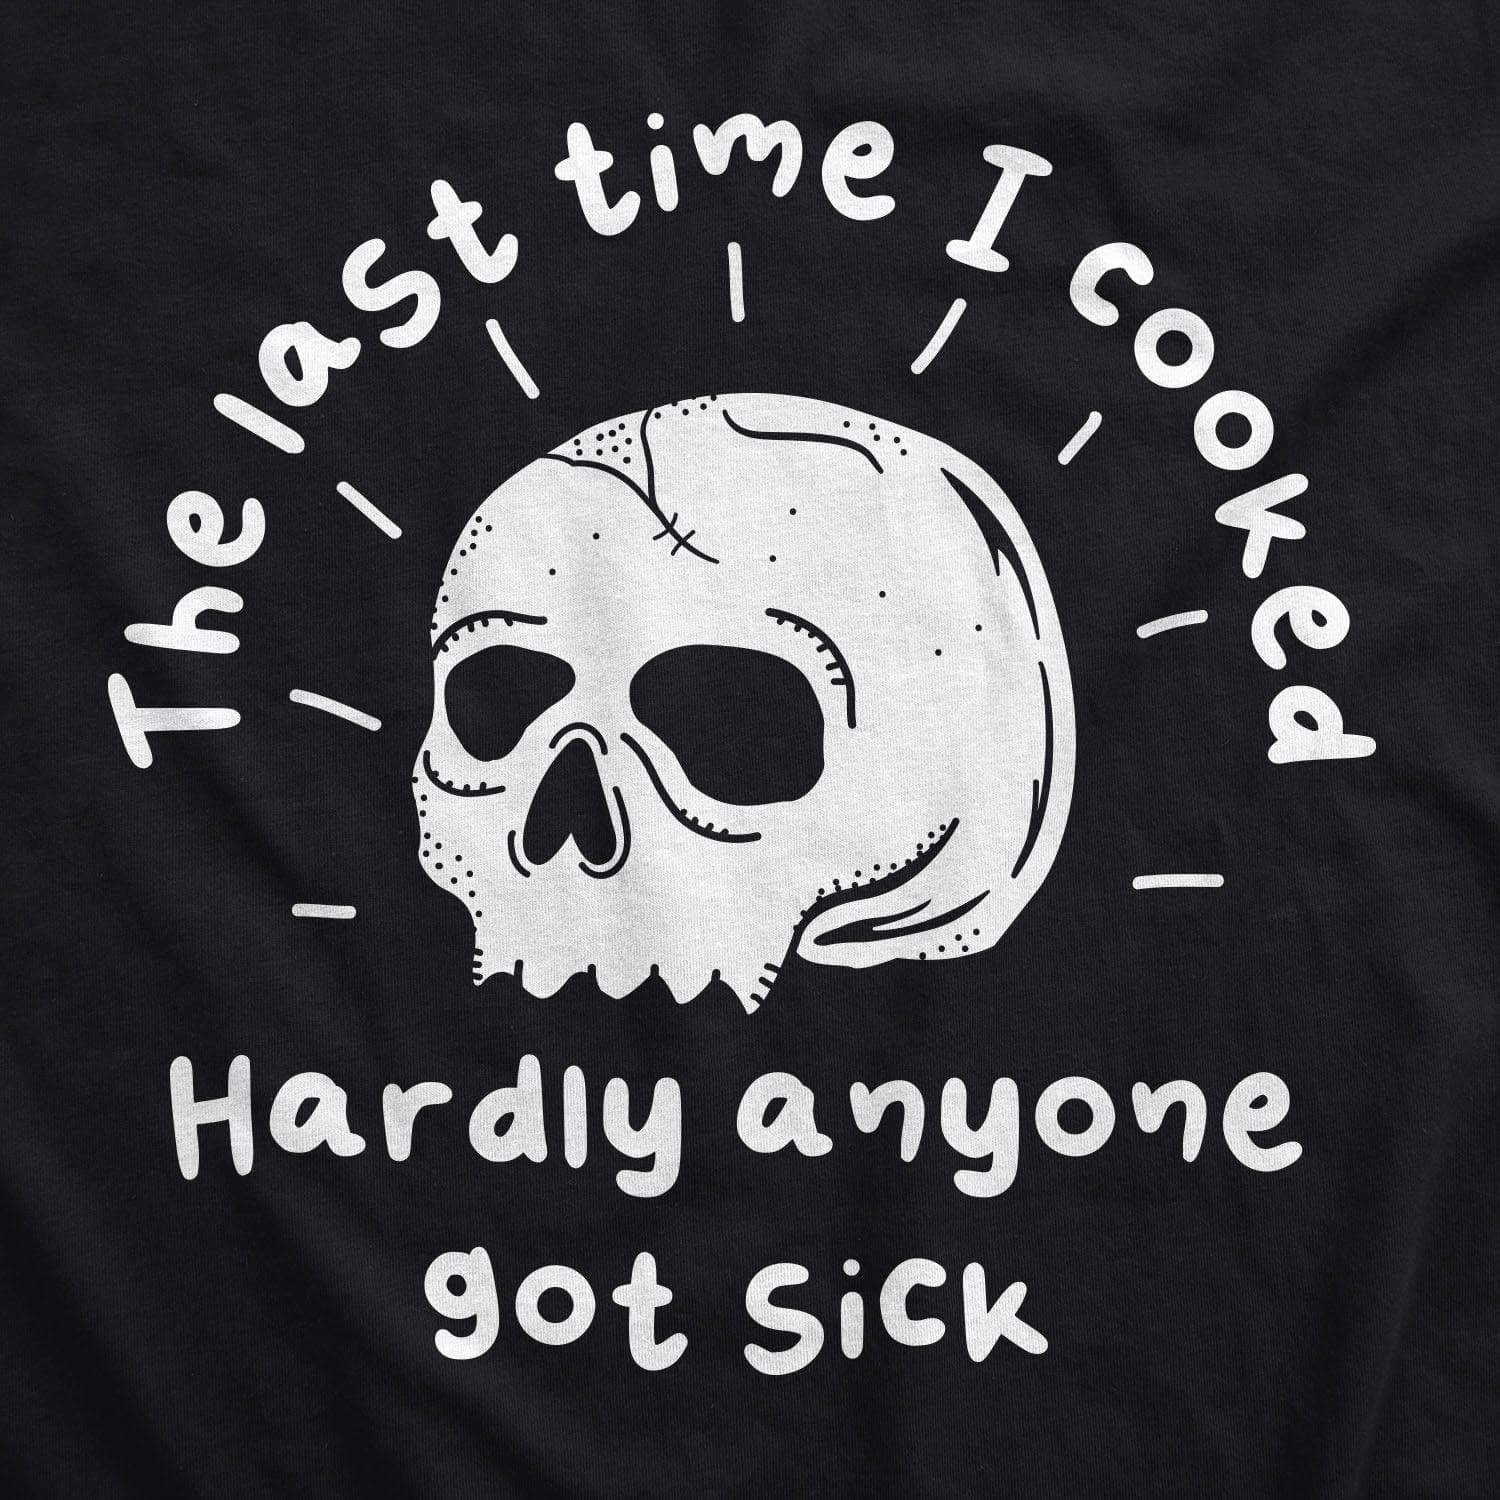 The Last Time I Cooked Hardly Anyone Got Sick Cookout Apron  -  Crazy Dog T-Shirts